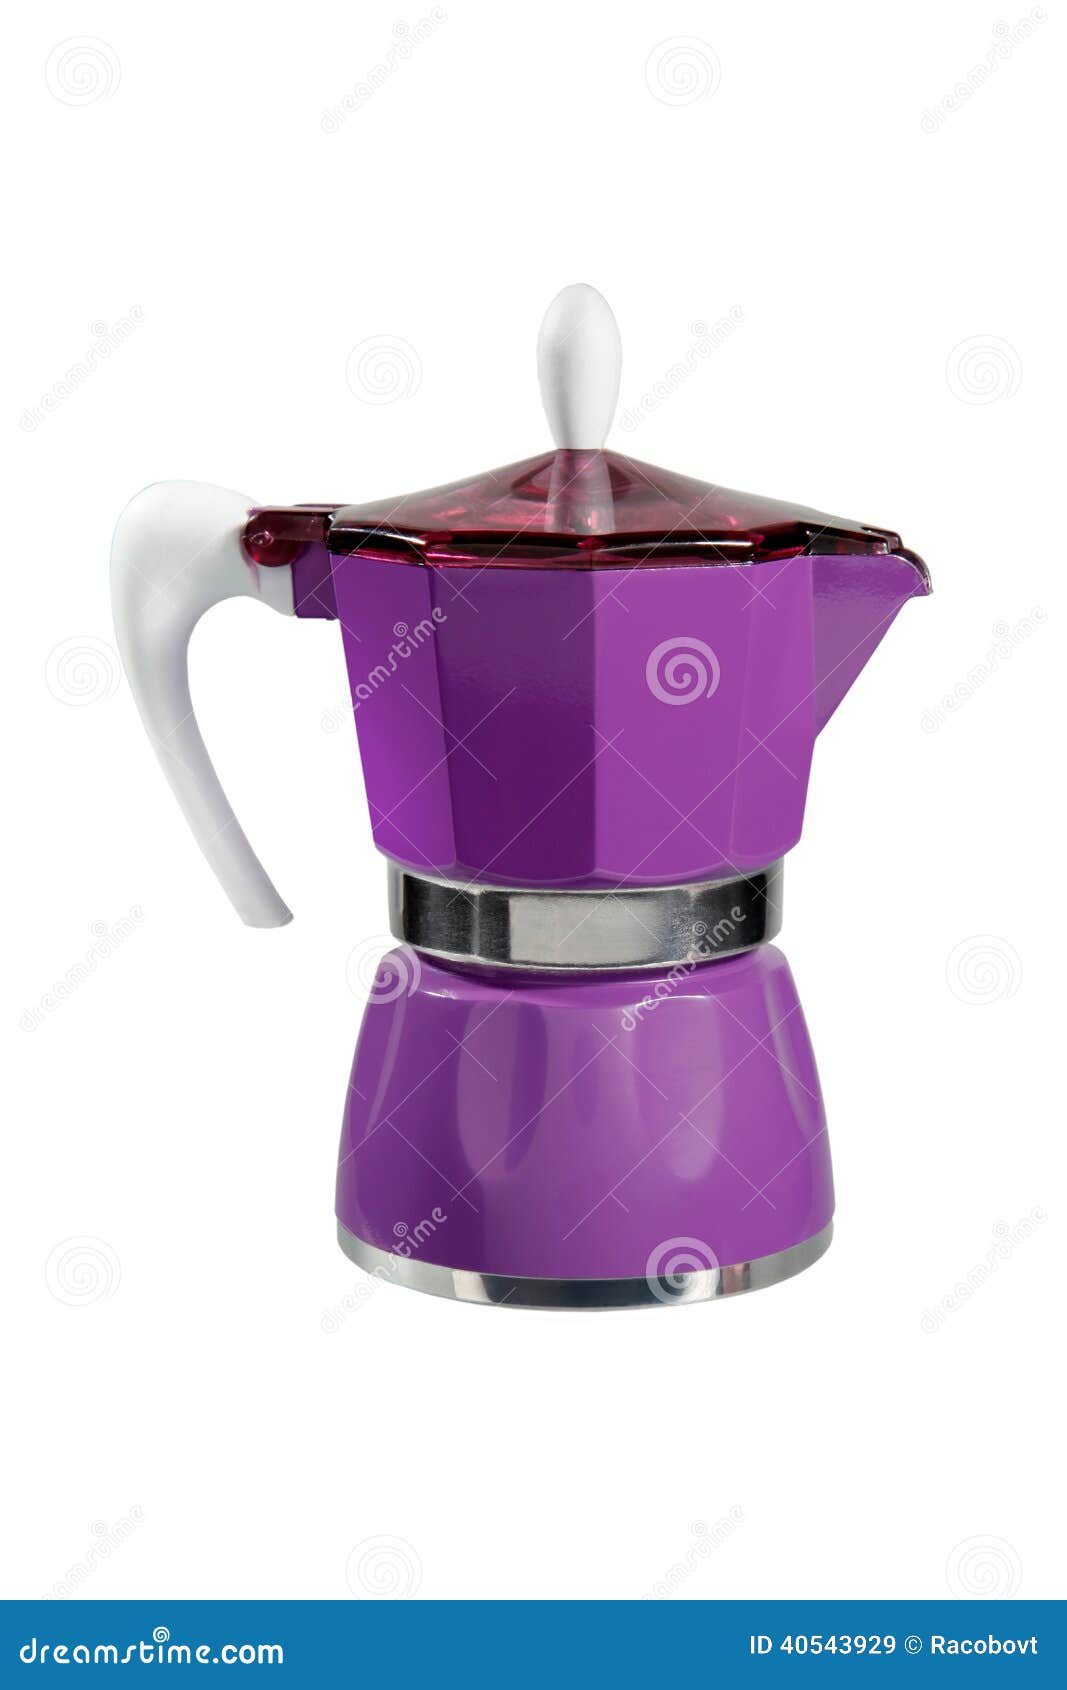 https://thumbs.dreamstime.com/z/purple-coffee-maker-isolated-white-background-40543929.jpg